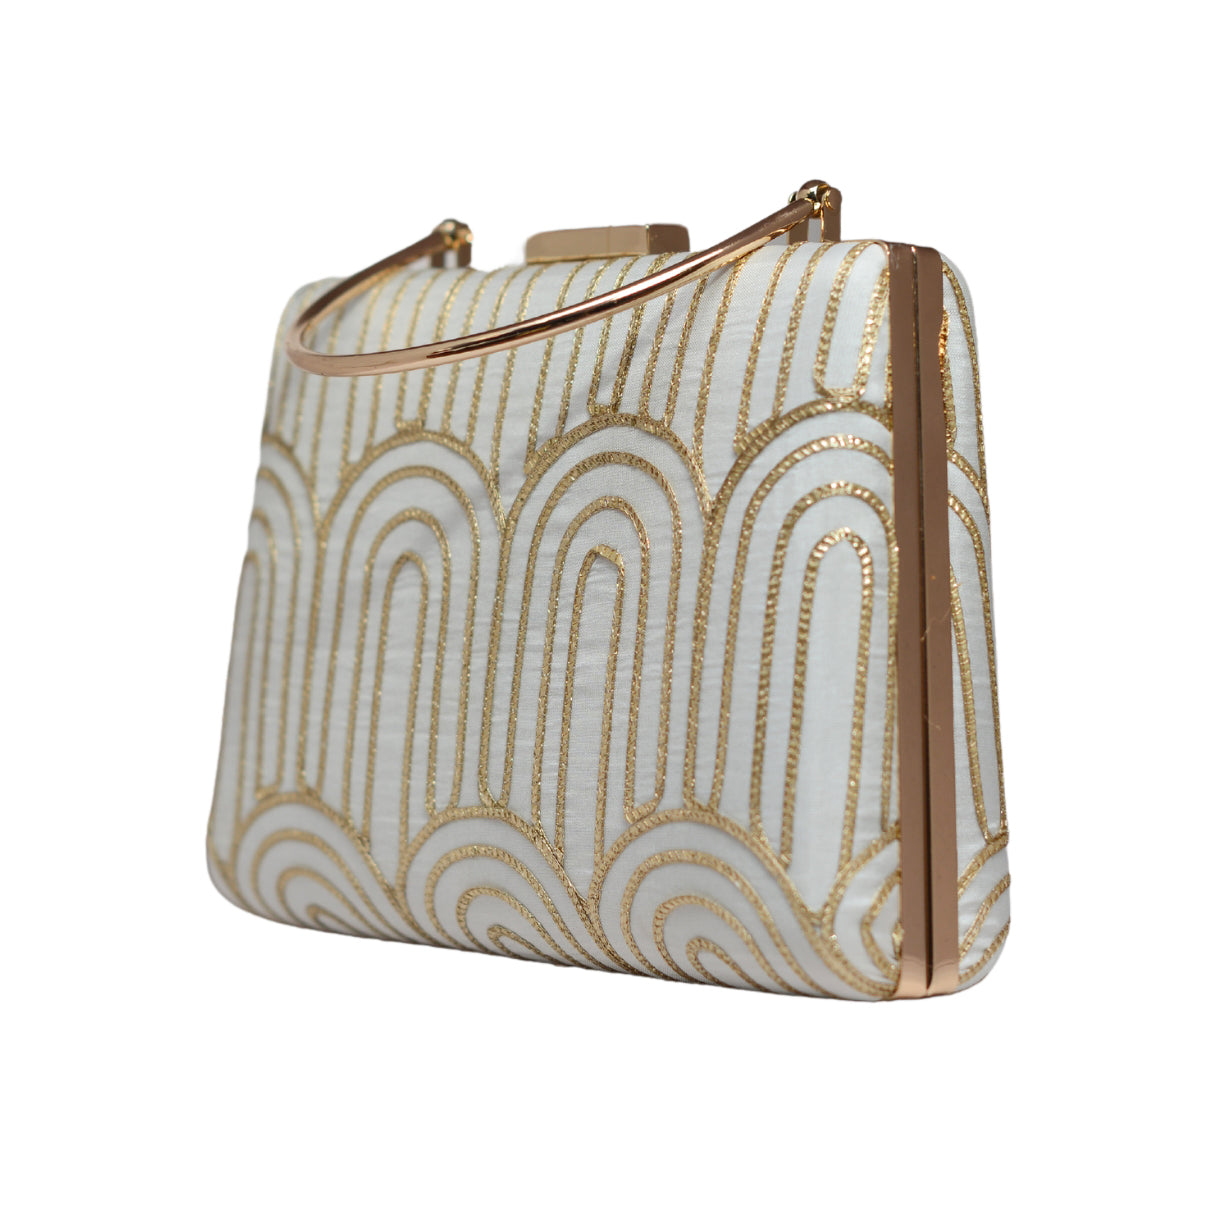 White And Golden Door Pattern Embroidery Clutch